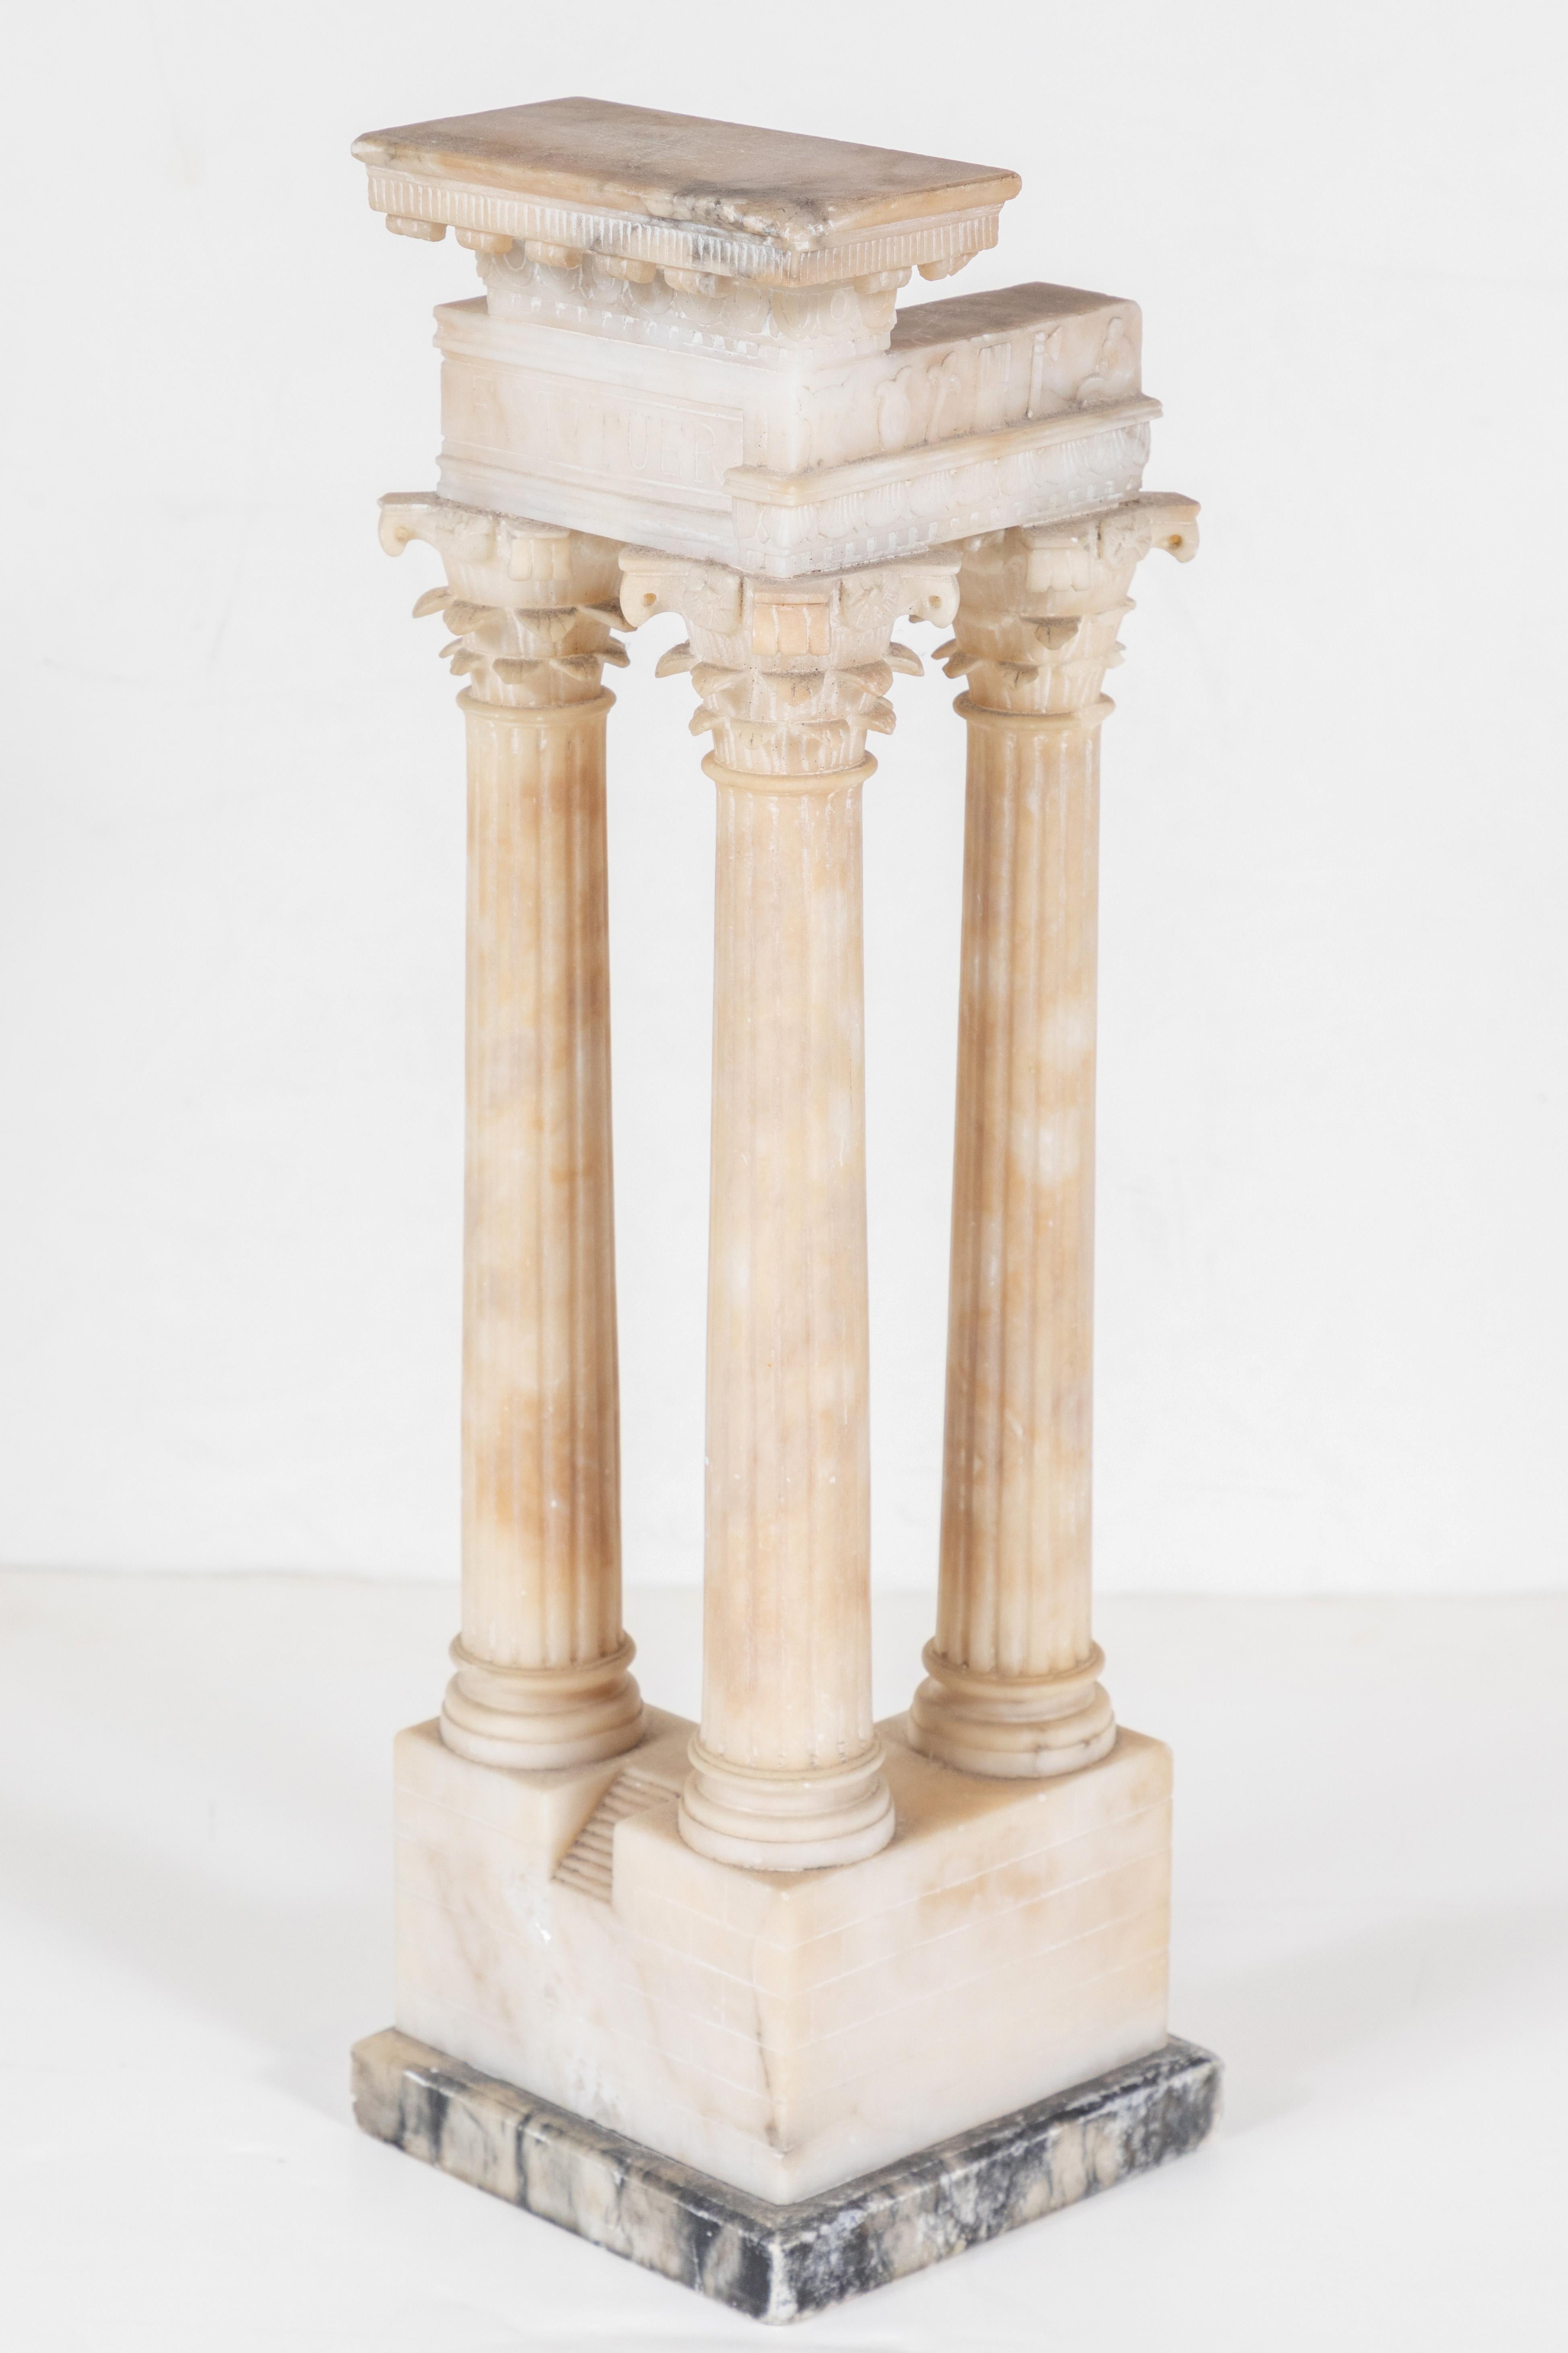 Beautifully carved, Grand Tour period architectural model featuring fluted columns surmounted by Corinthian capitals and a relief carved pediment above a raised base inset with a flight of steps.